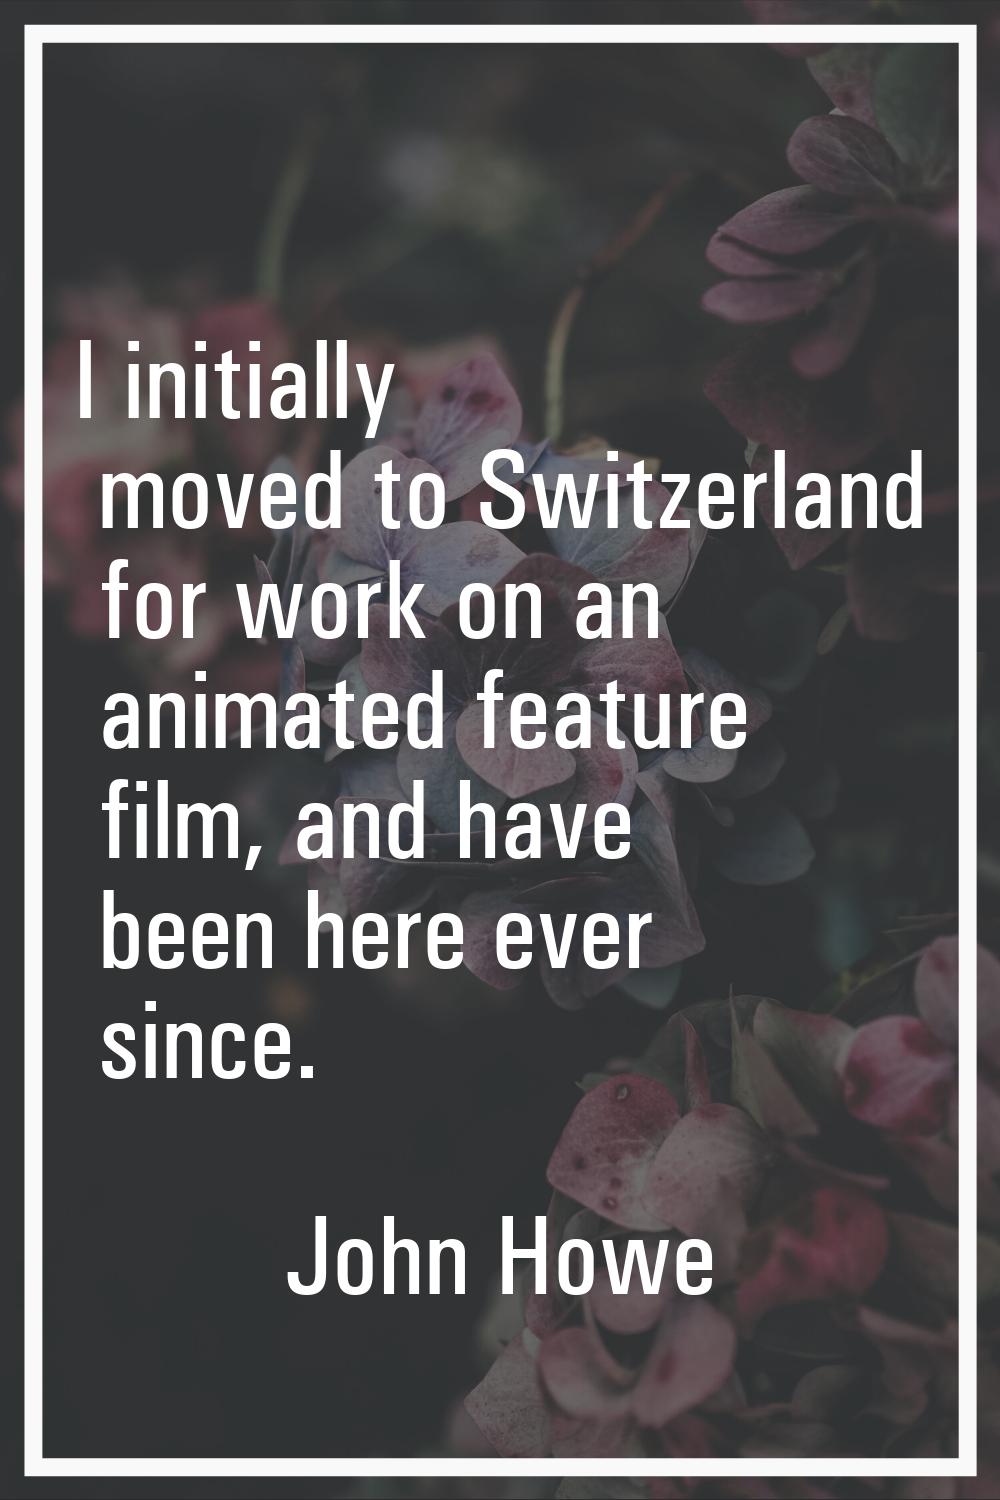 I initially moved to Switzerland for work on an animated feature film, and have been here ever sinc